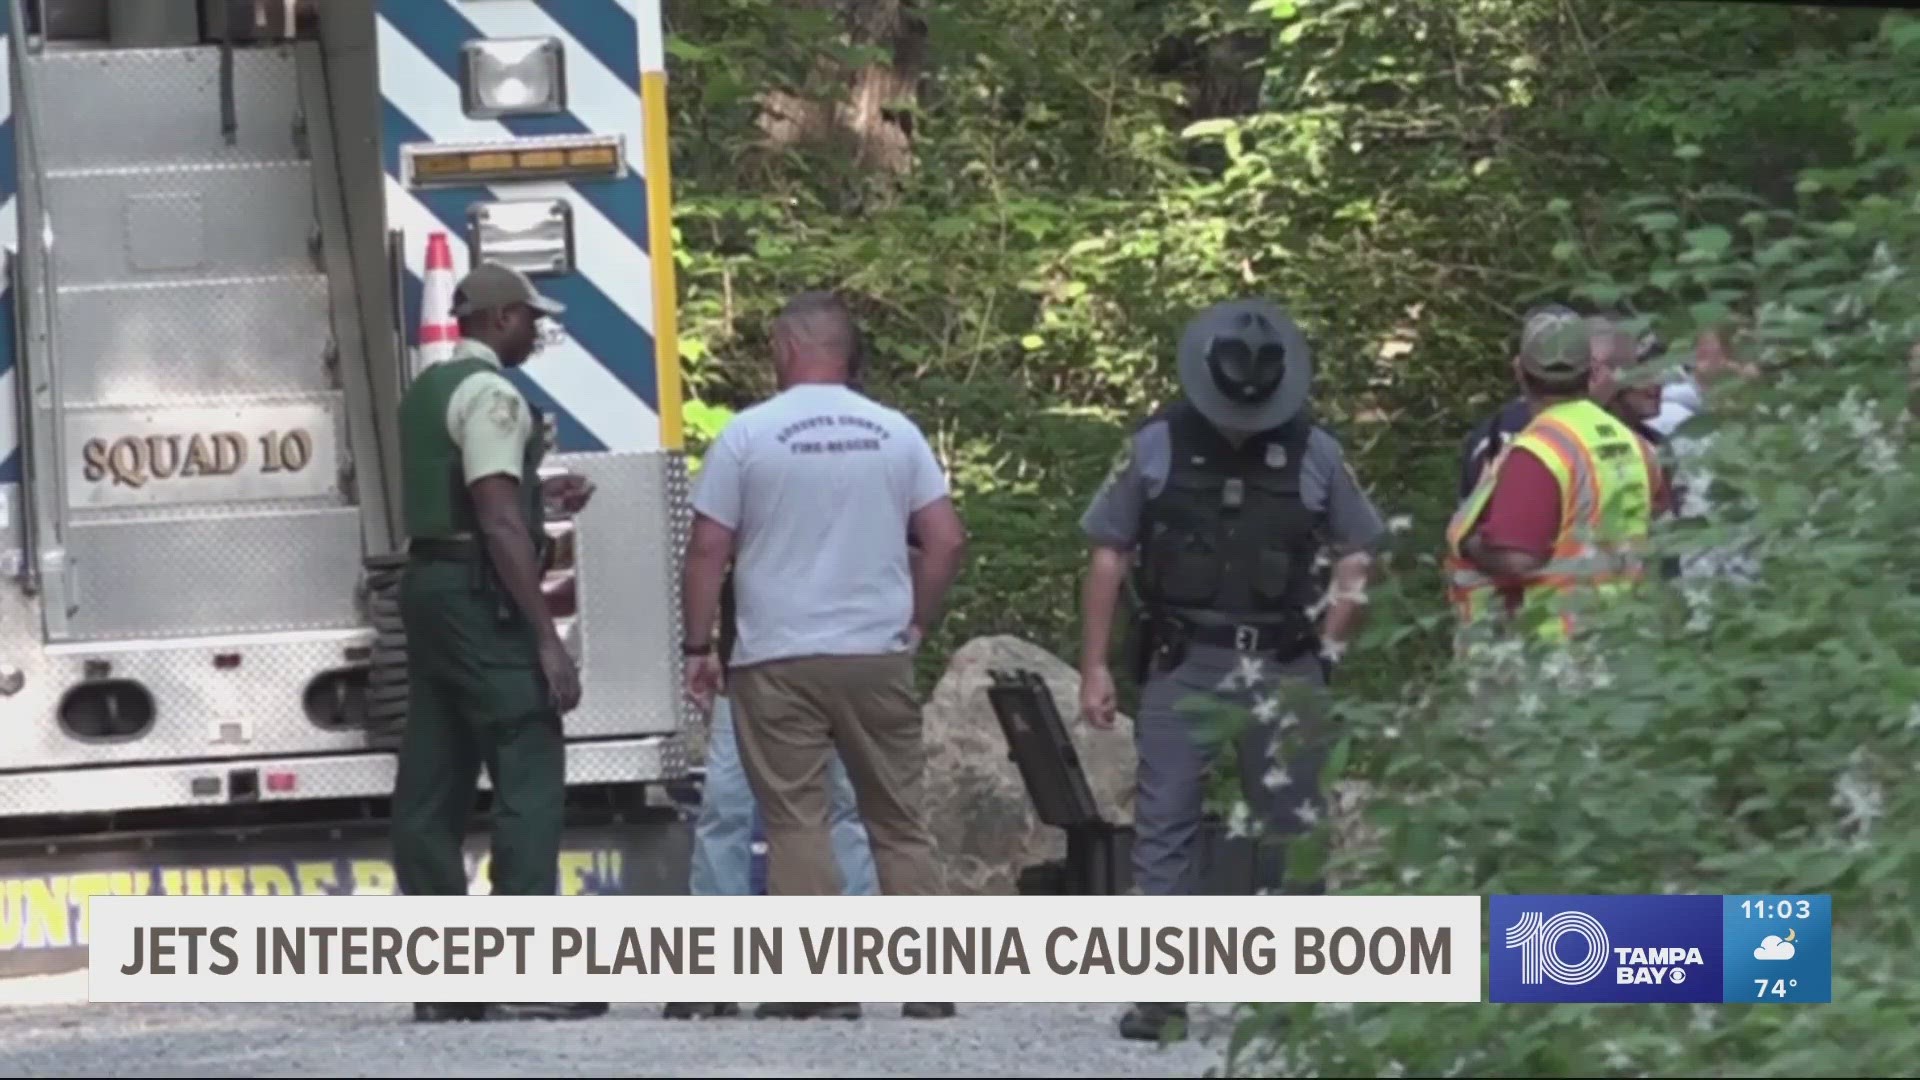 The fighter jet caused a loud sonic boom that was heard across the capital region.